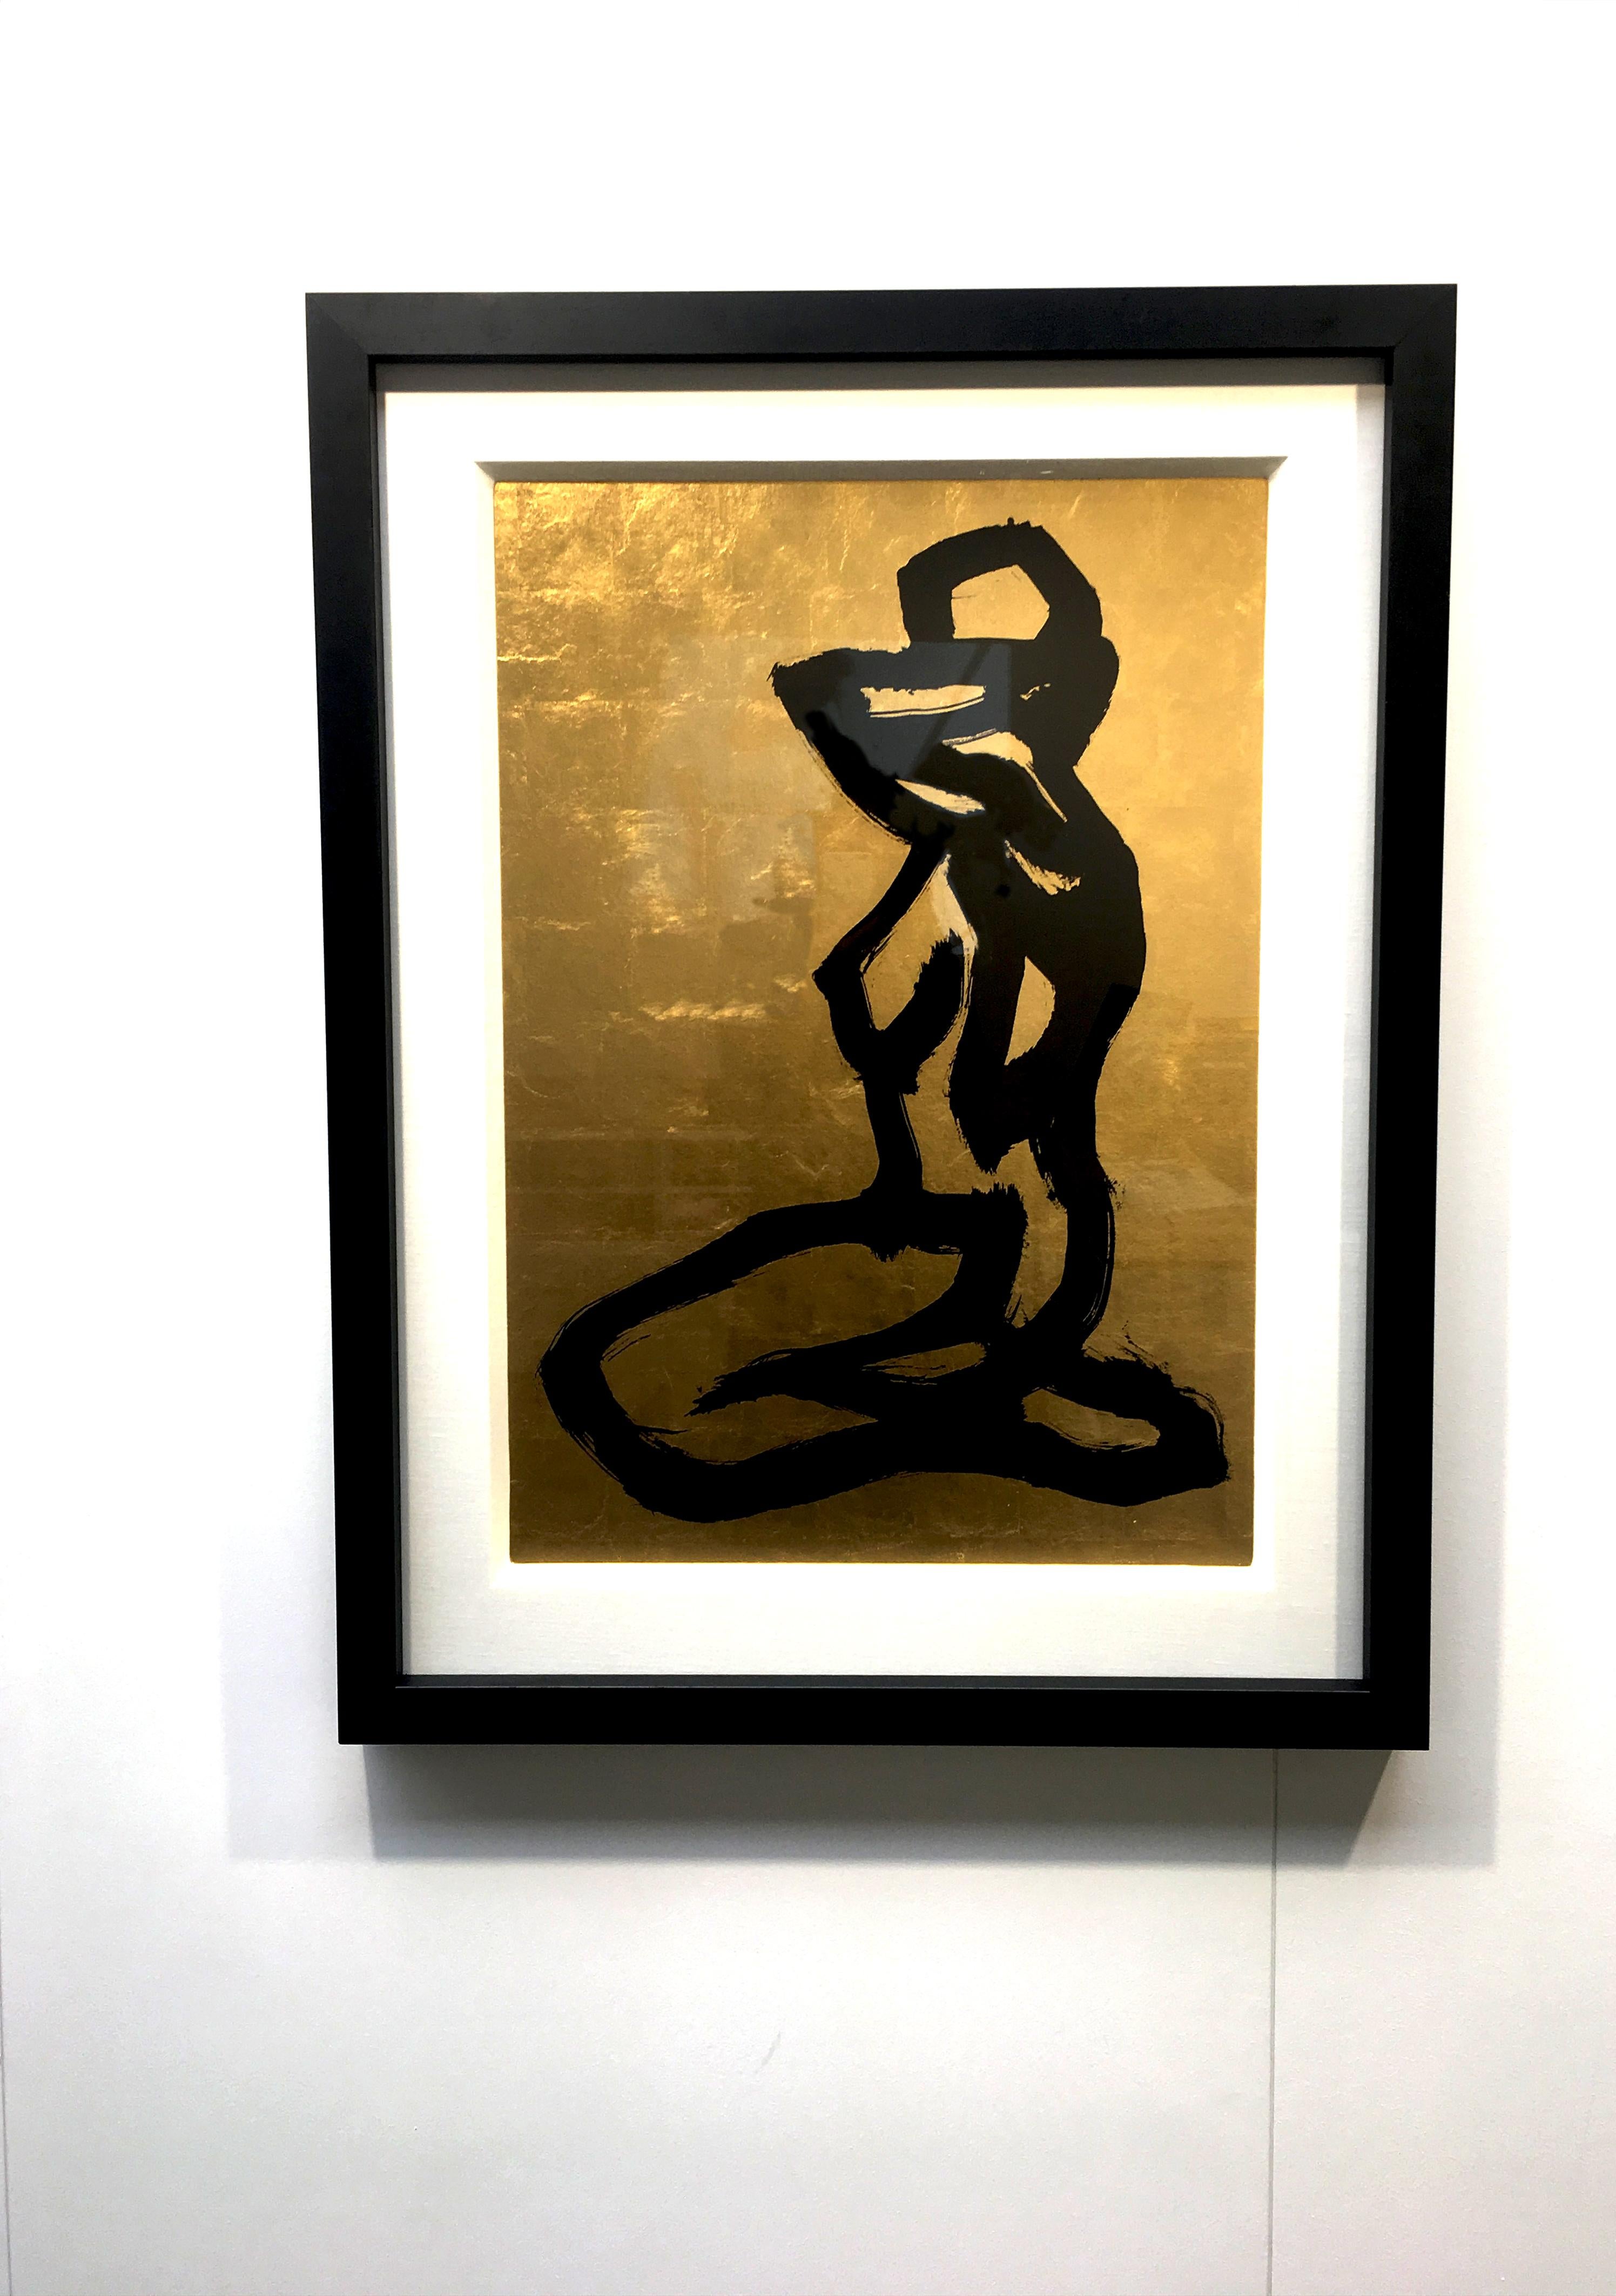 Bond Girl - Modern Abstract silver leaf, black ink figurative painting  - Painting by Hocktee Tan